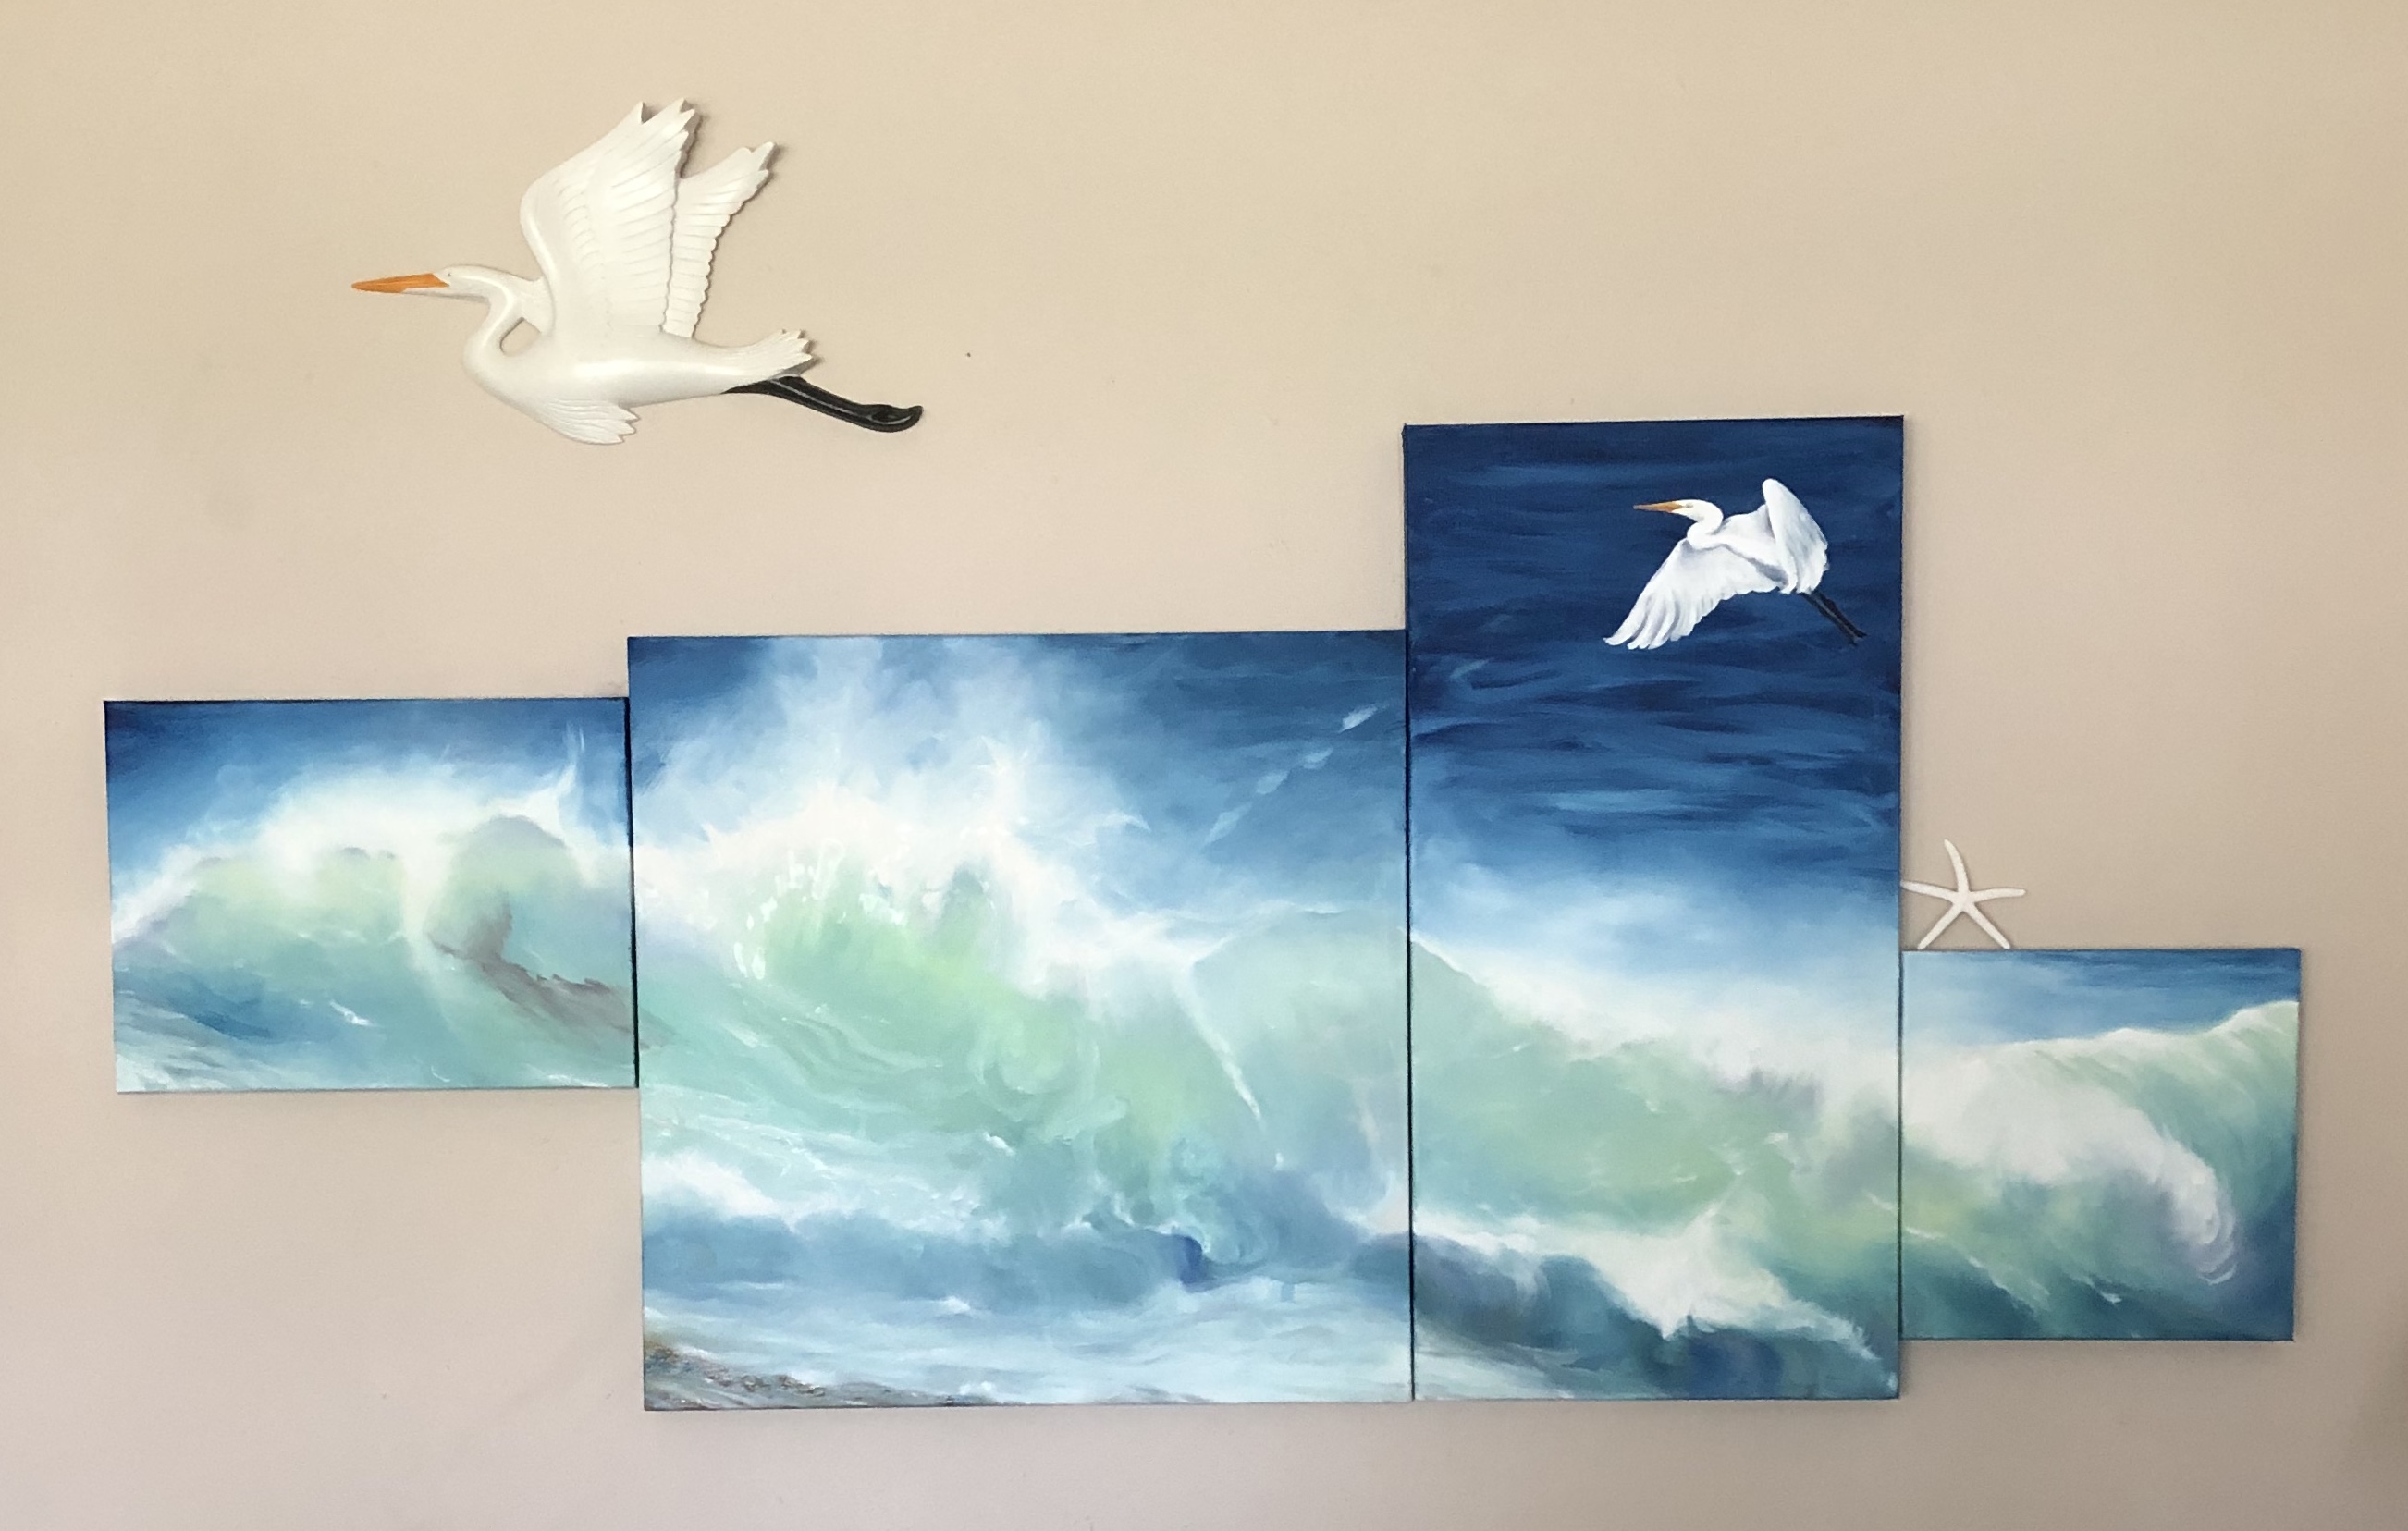 1000 Voices 8 - 30 in x 67 in, Oil on 4 canvases with composite of Great Egret by Lazanna Paskalidis